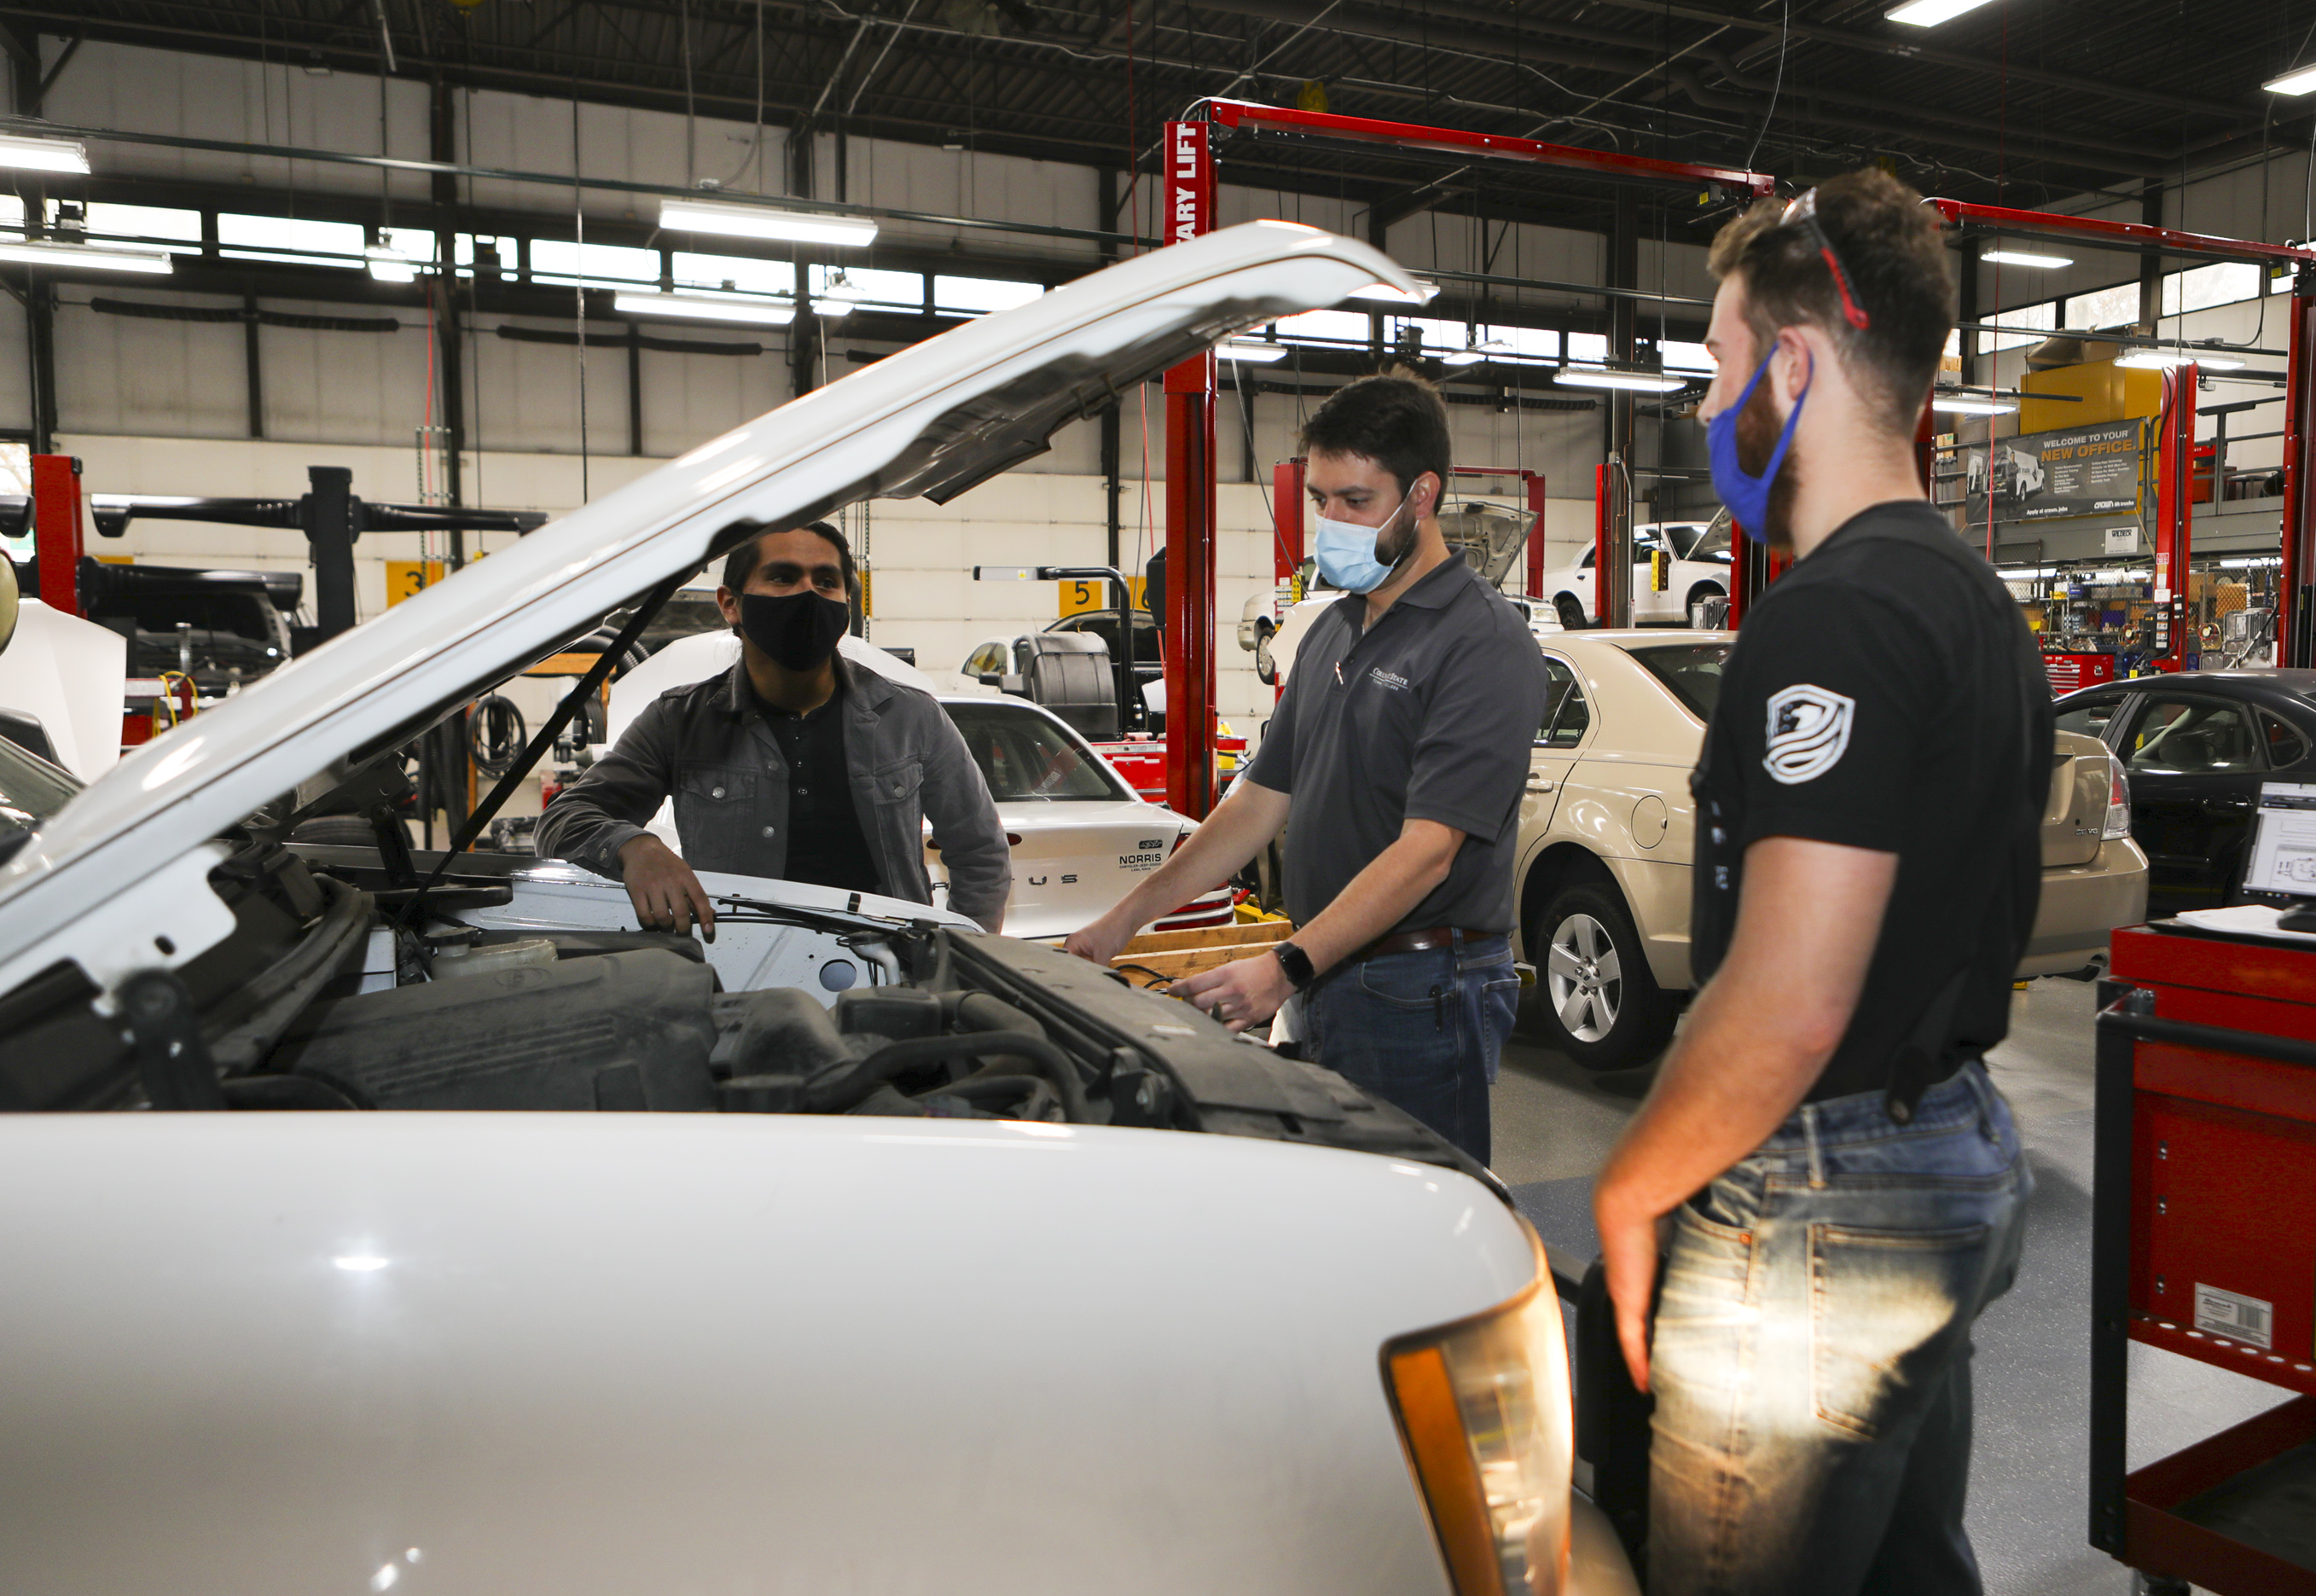 Jose Nunez, student; Ian Andrews, assistant professor; and Luke Eckels, student, taking part in the Powertrain Systems Service class in the Delaware Hall Automotive Technology Lab on November 19.